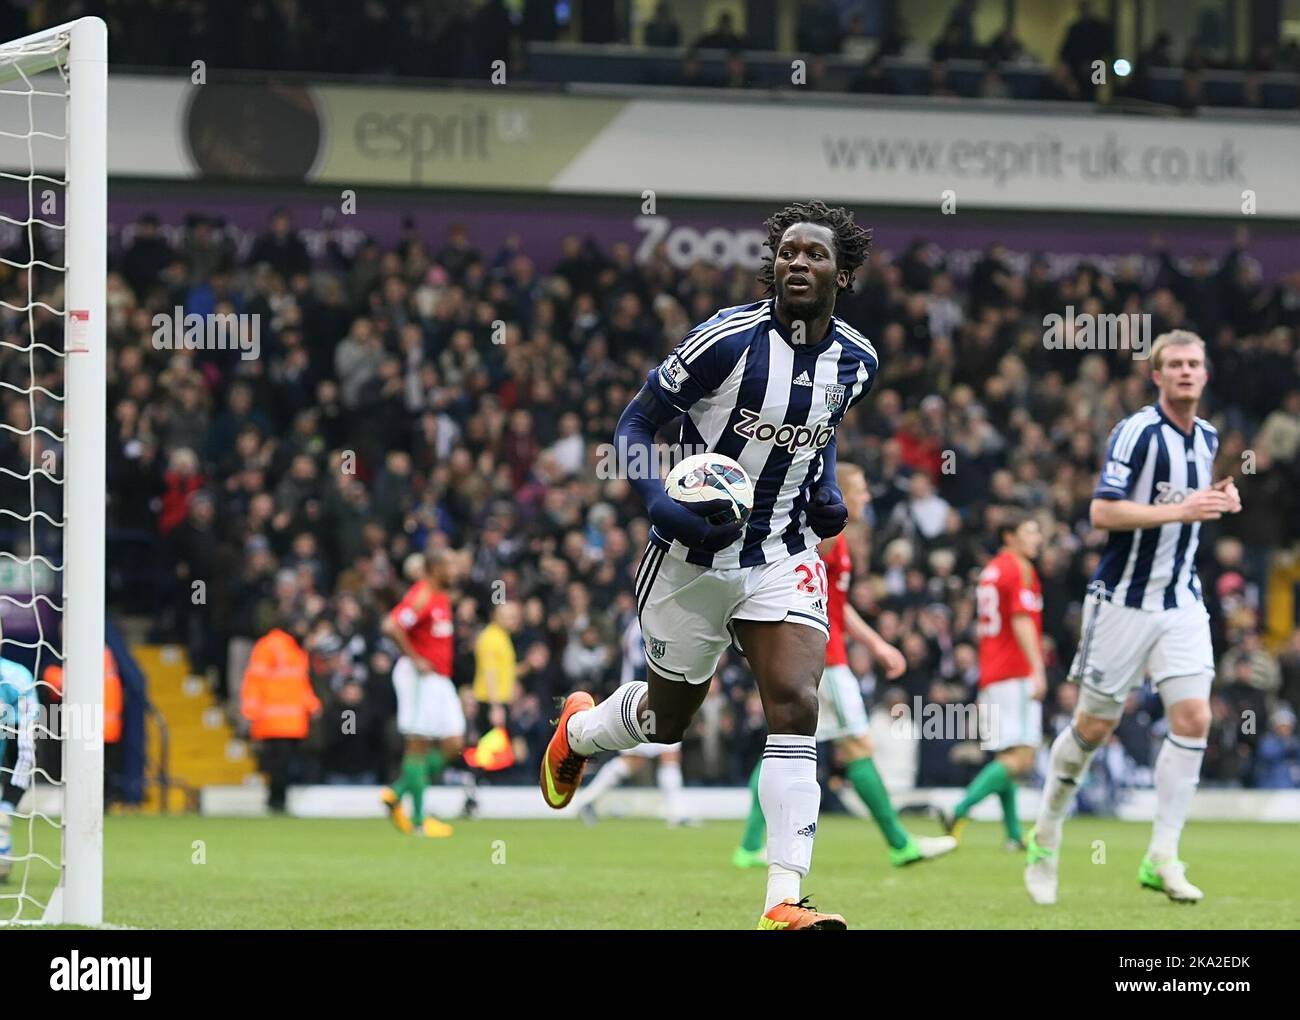 09 March 2013  - Soccer - Barclays Premiership Football - West Bromwich Albion Vs. Swansea City - Romelu Lakuku of West Bromwich Albion celebrates after equalising for WBA (1-1)  - Photo: Paul Roberts/Pathos. Stock Photo